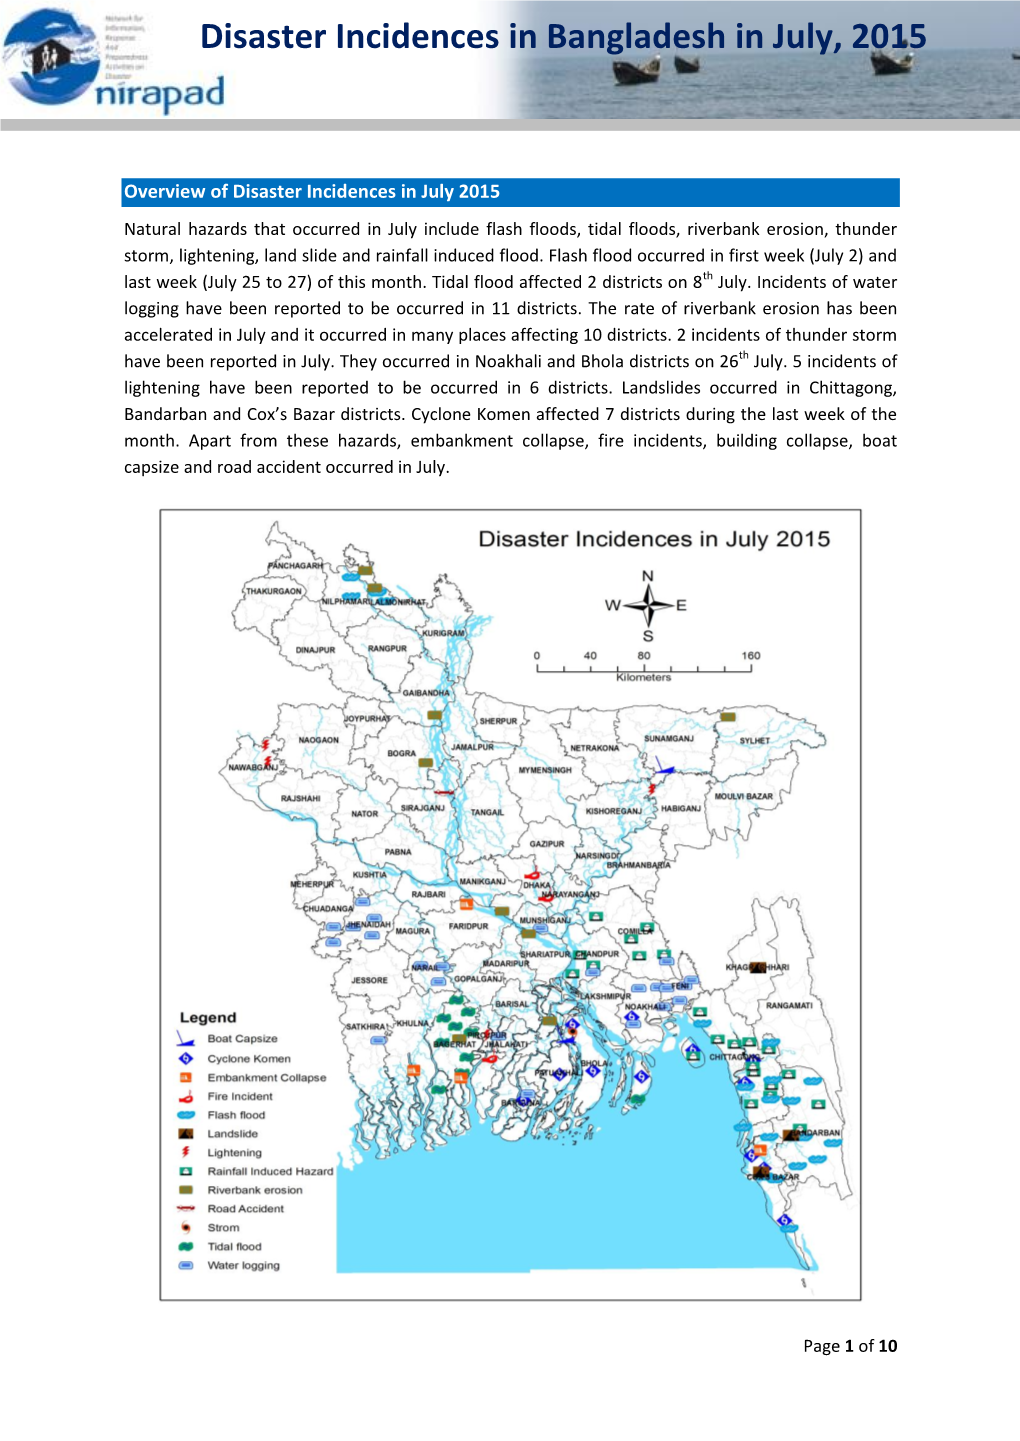 Disaster Incidences in Bangladesh in July, 2015